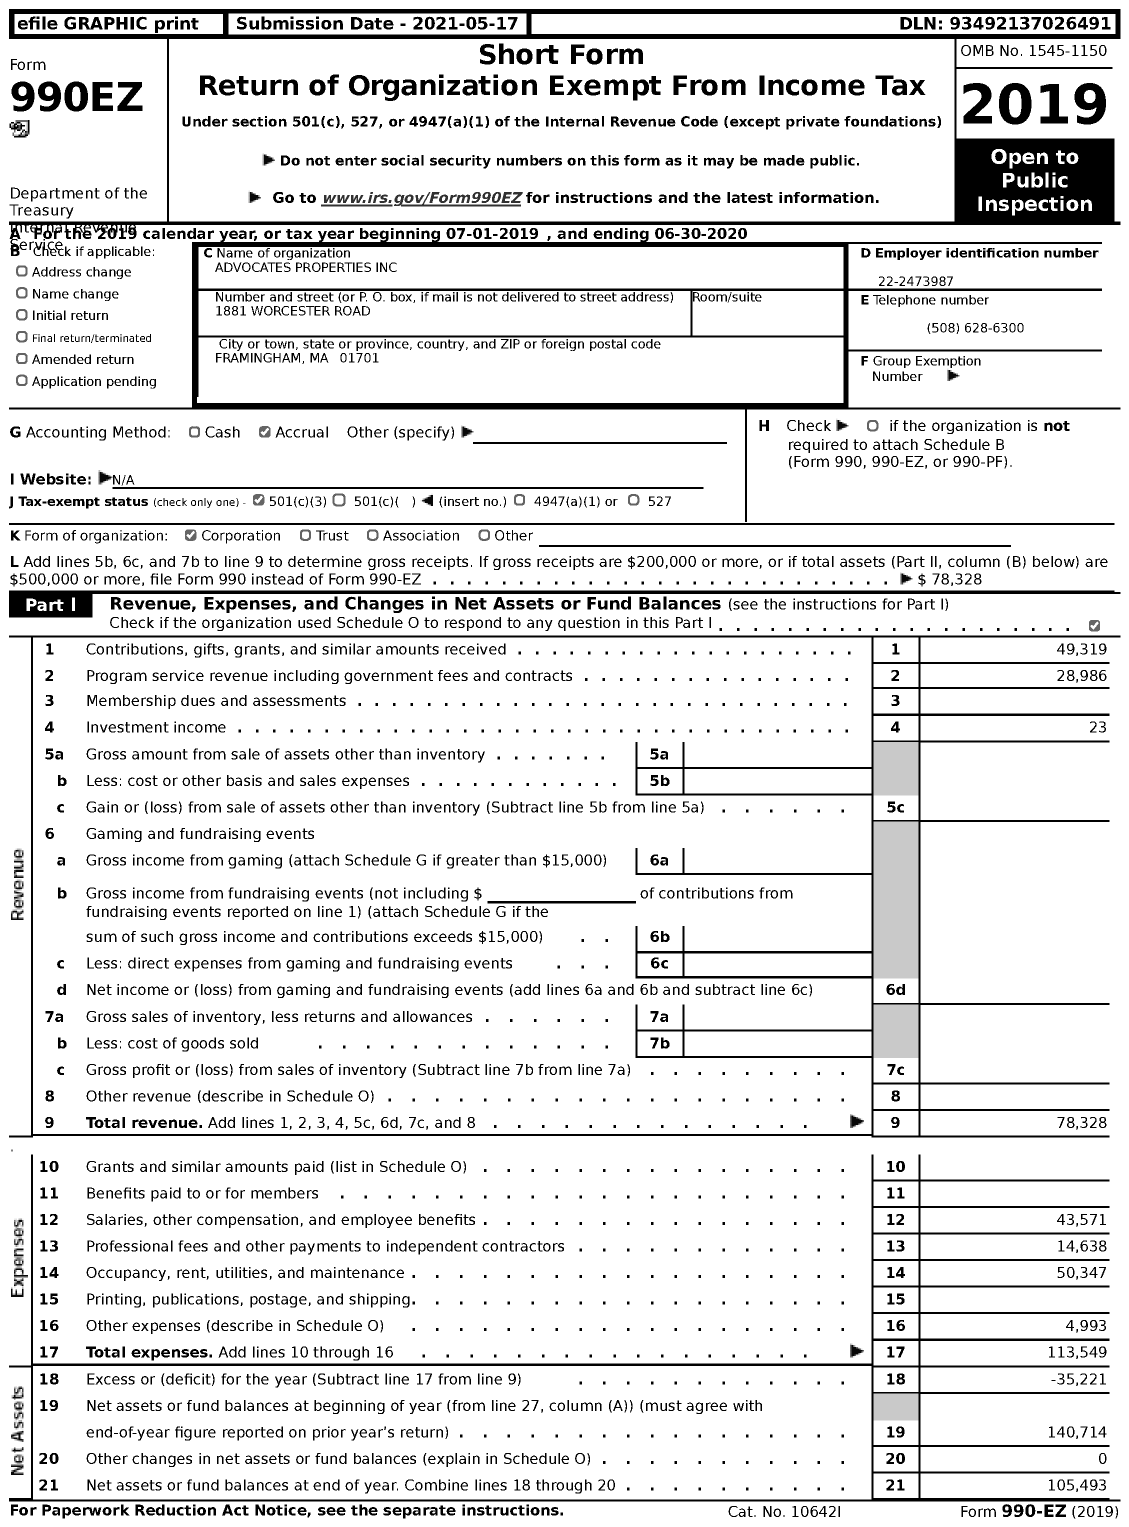 Image of first page of 2019 Form 990EZ for Advocates Properties